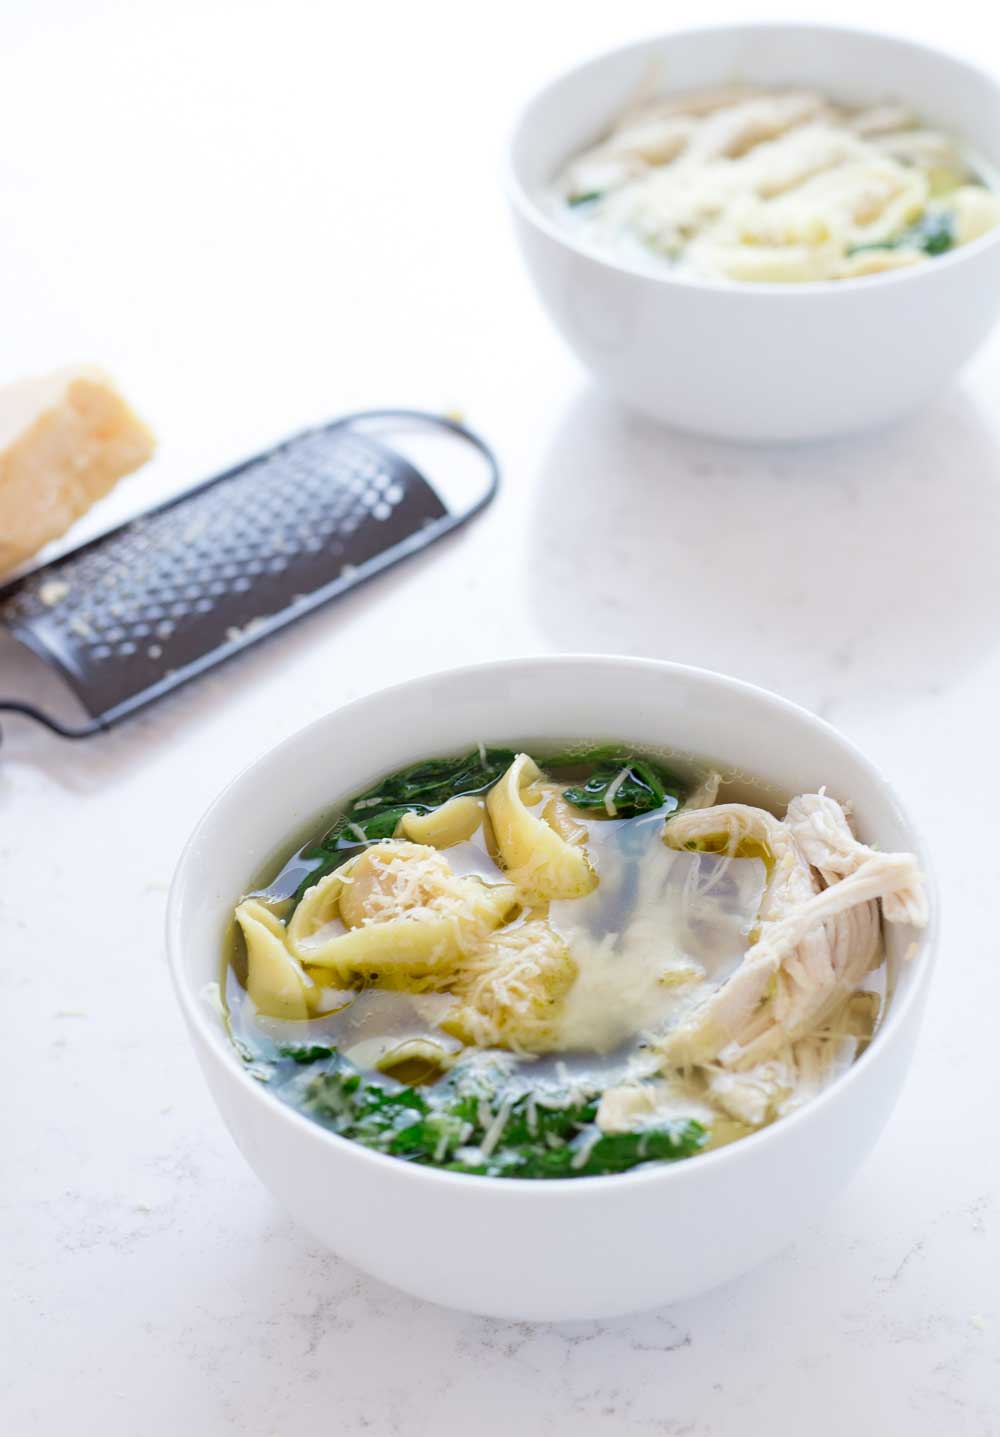 A filling chicken tortellini soup that is as easy to make as heating up a can of soup. But sooooo much better! Take a 2 minute dash around the supermarket and you can have dinner on the table in 10 minutes.